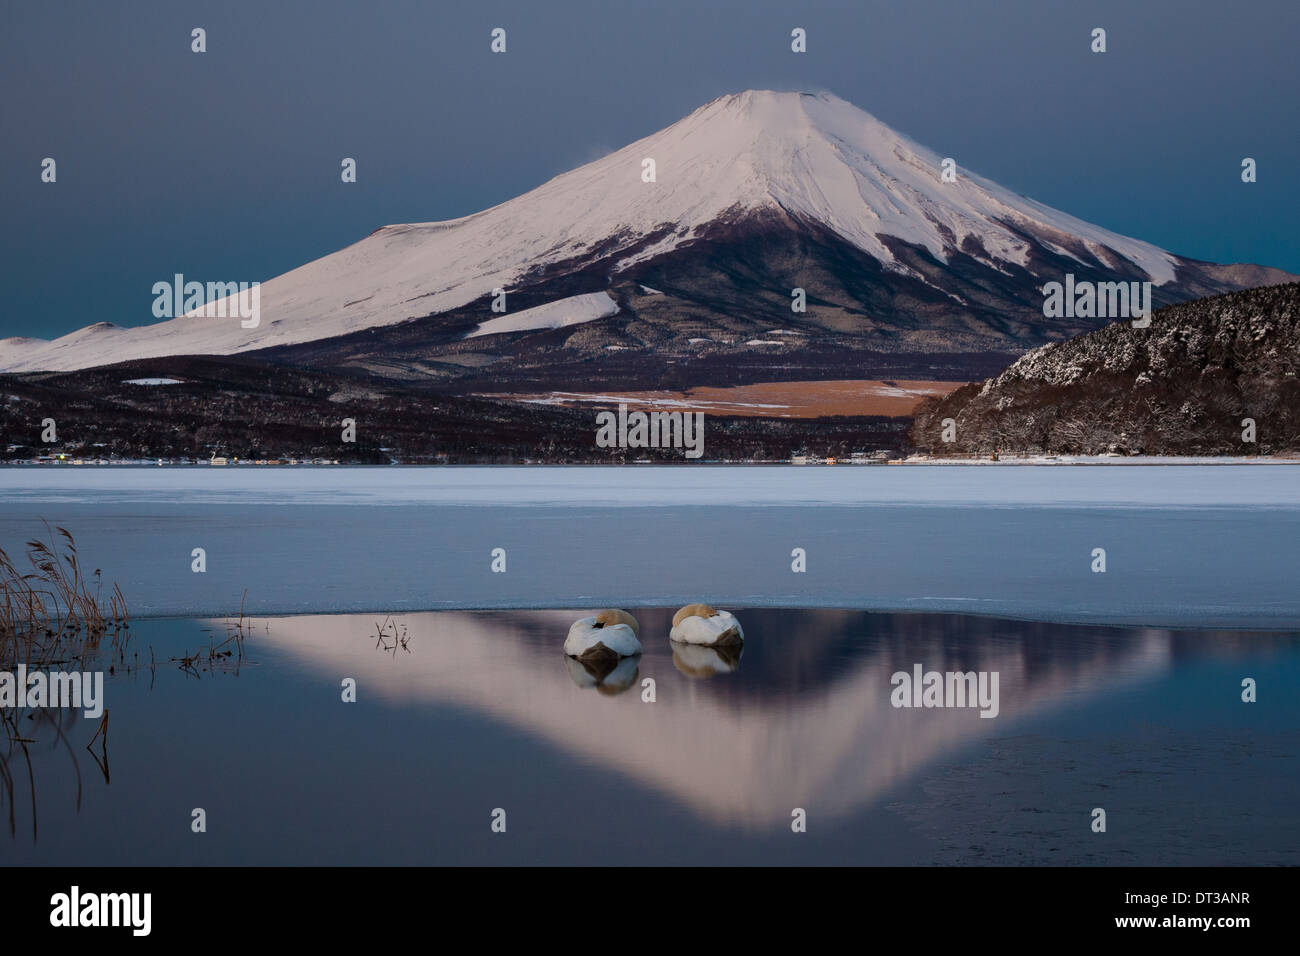 A pair of mute swans in Lake Kawaguchi in the reflection of Mt. Fuji, Japan Stock Photo